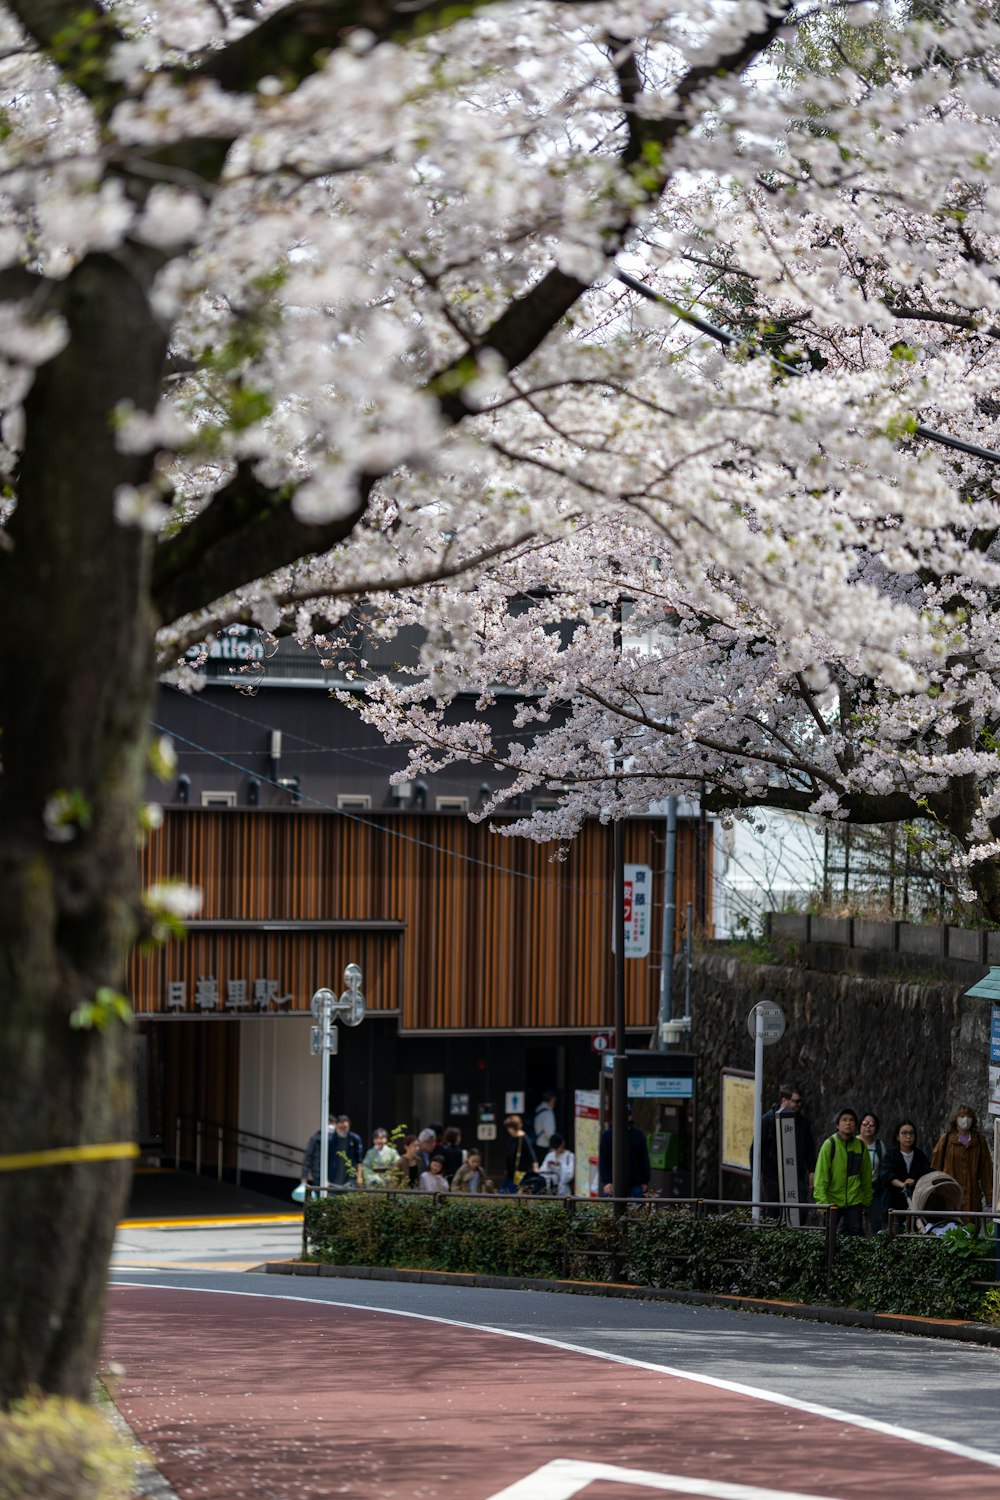 a group of people walking down a street under cherry blossom trees